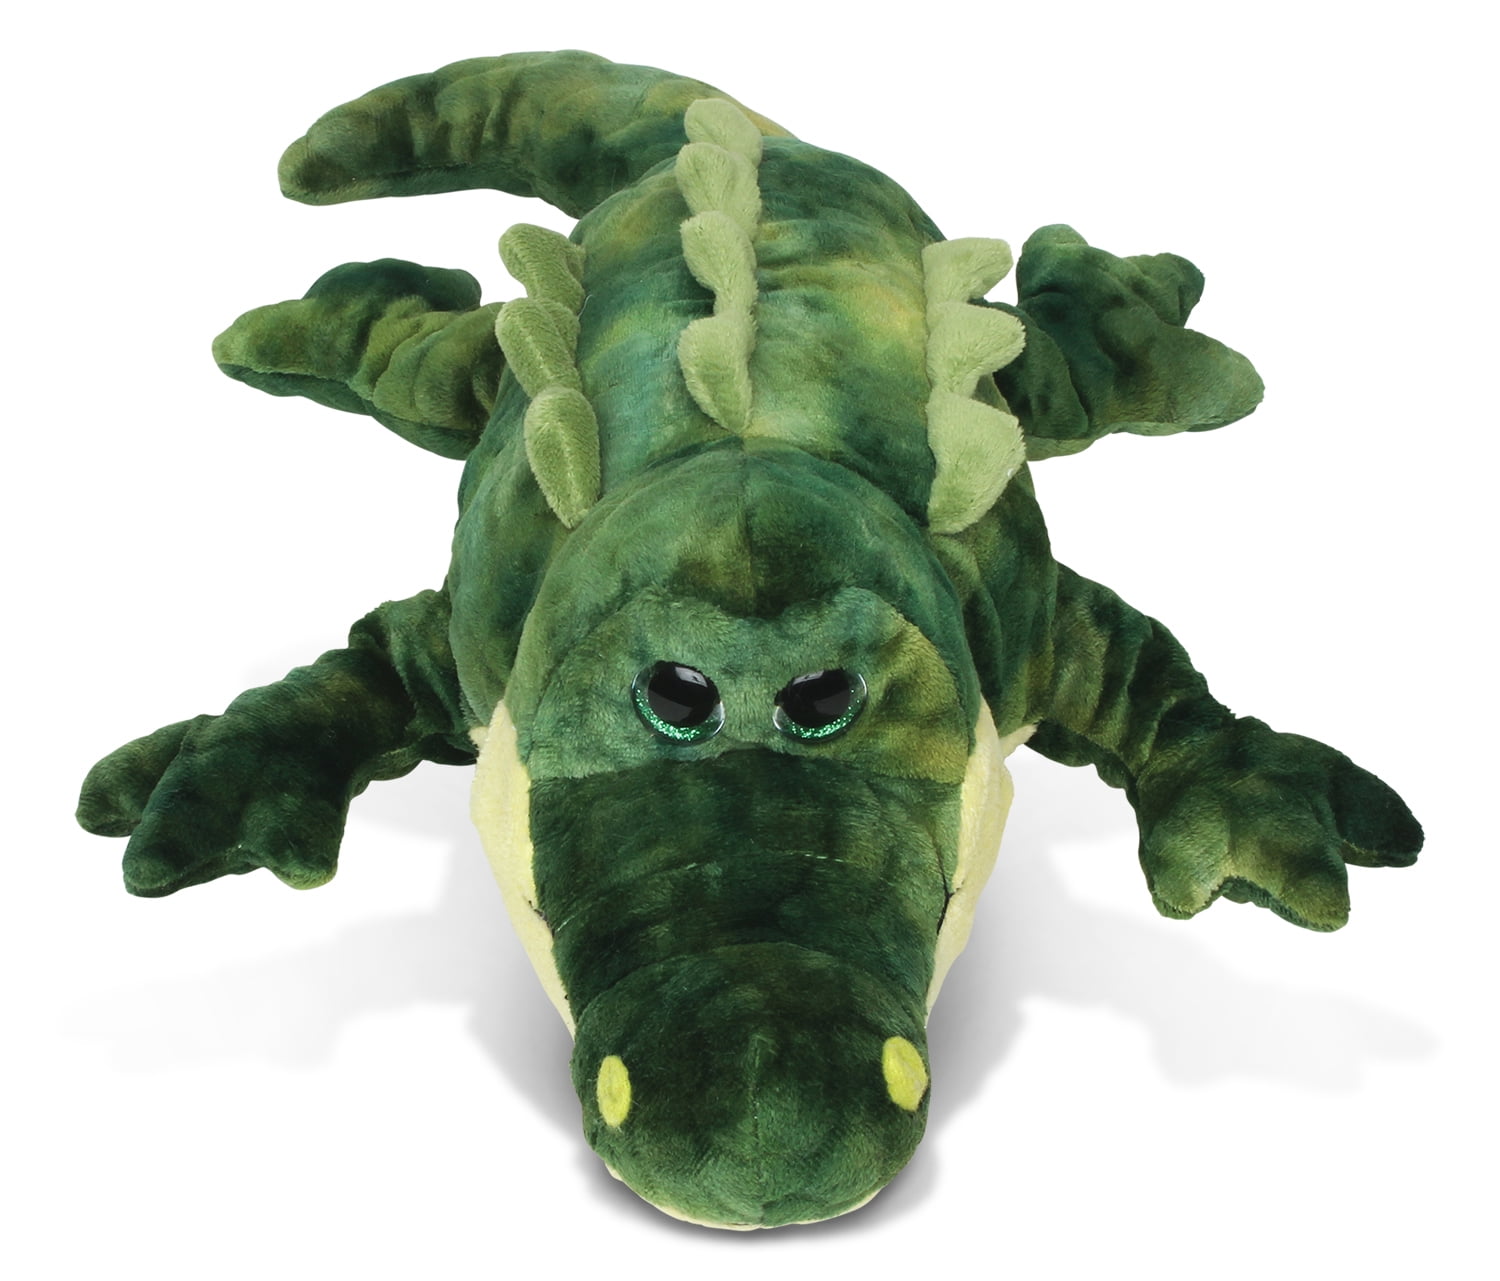 Gharial Crocodile 23 Inch for sale online Adventure Planet Plush 